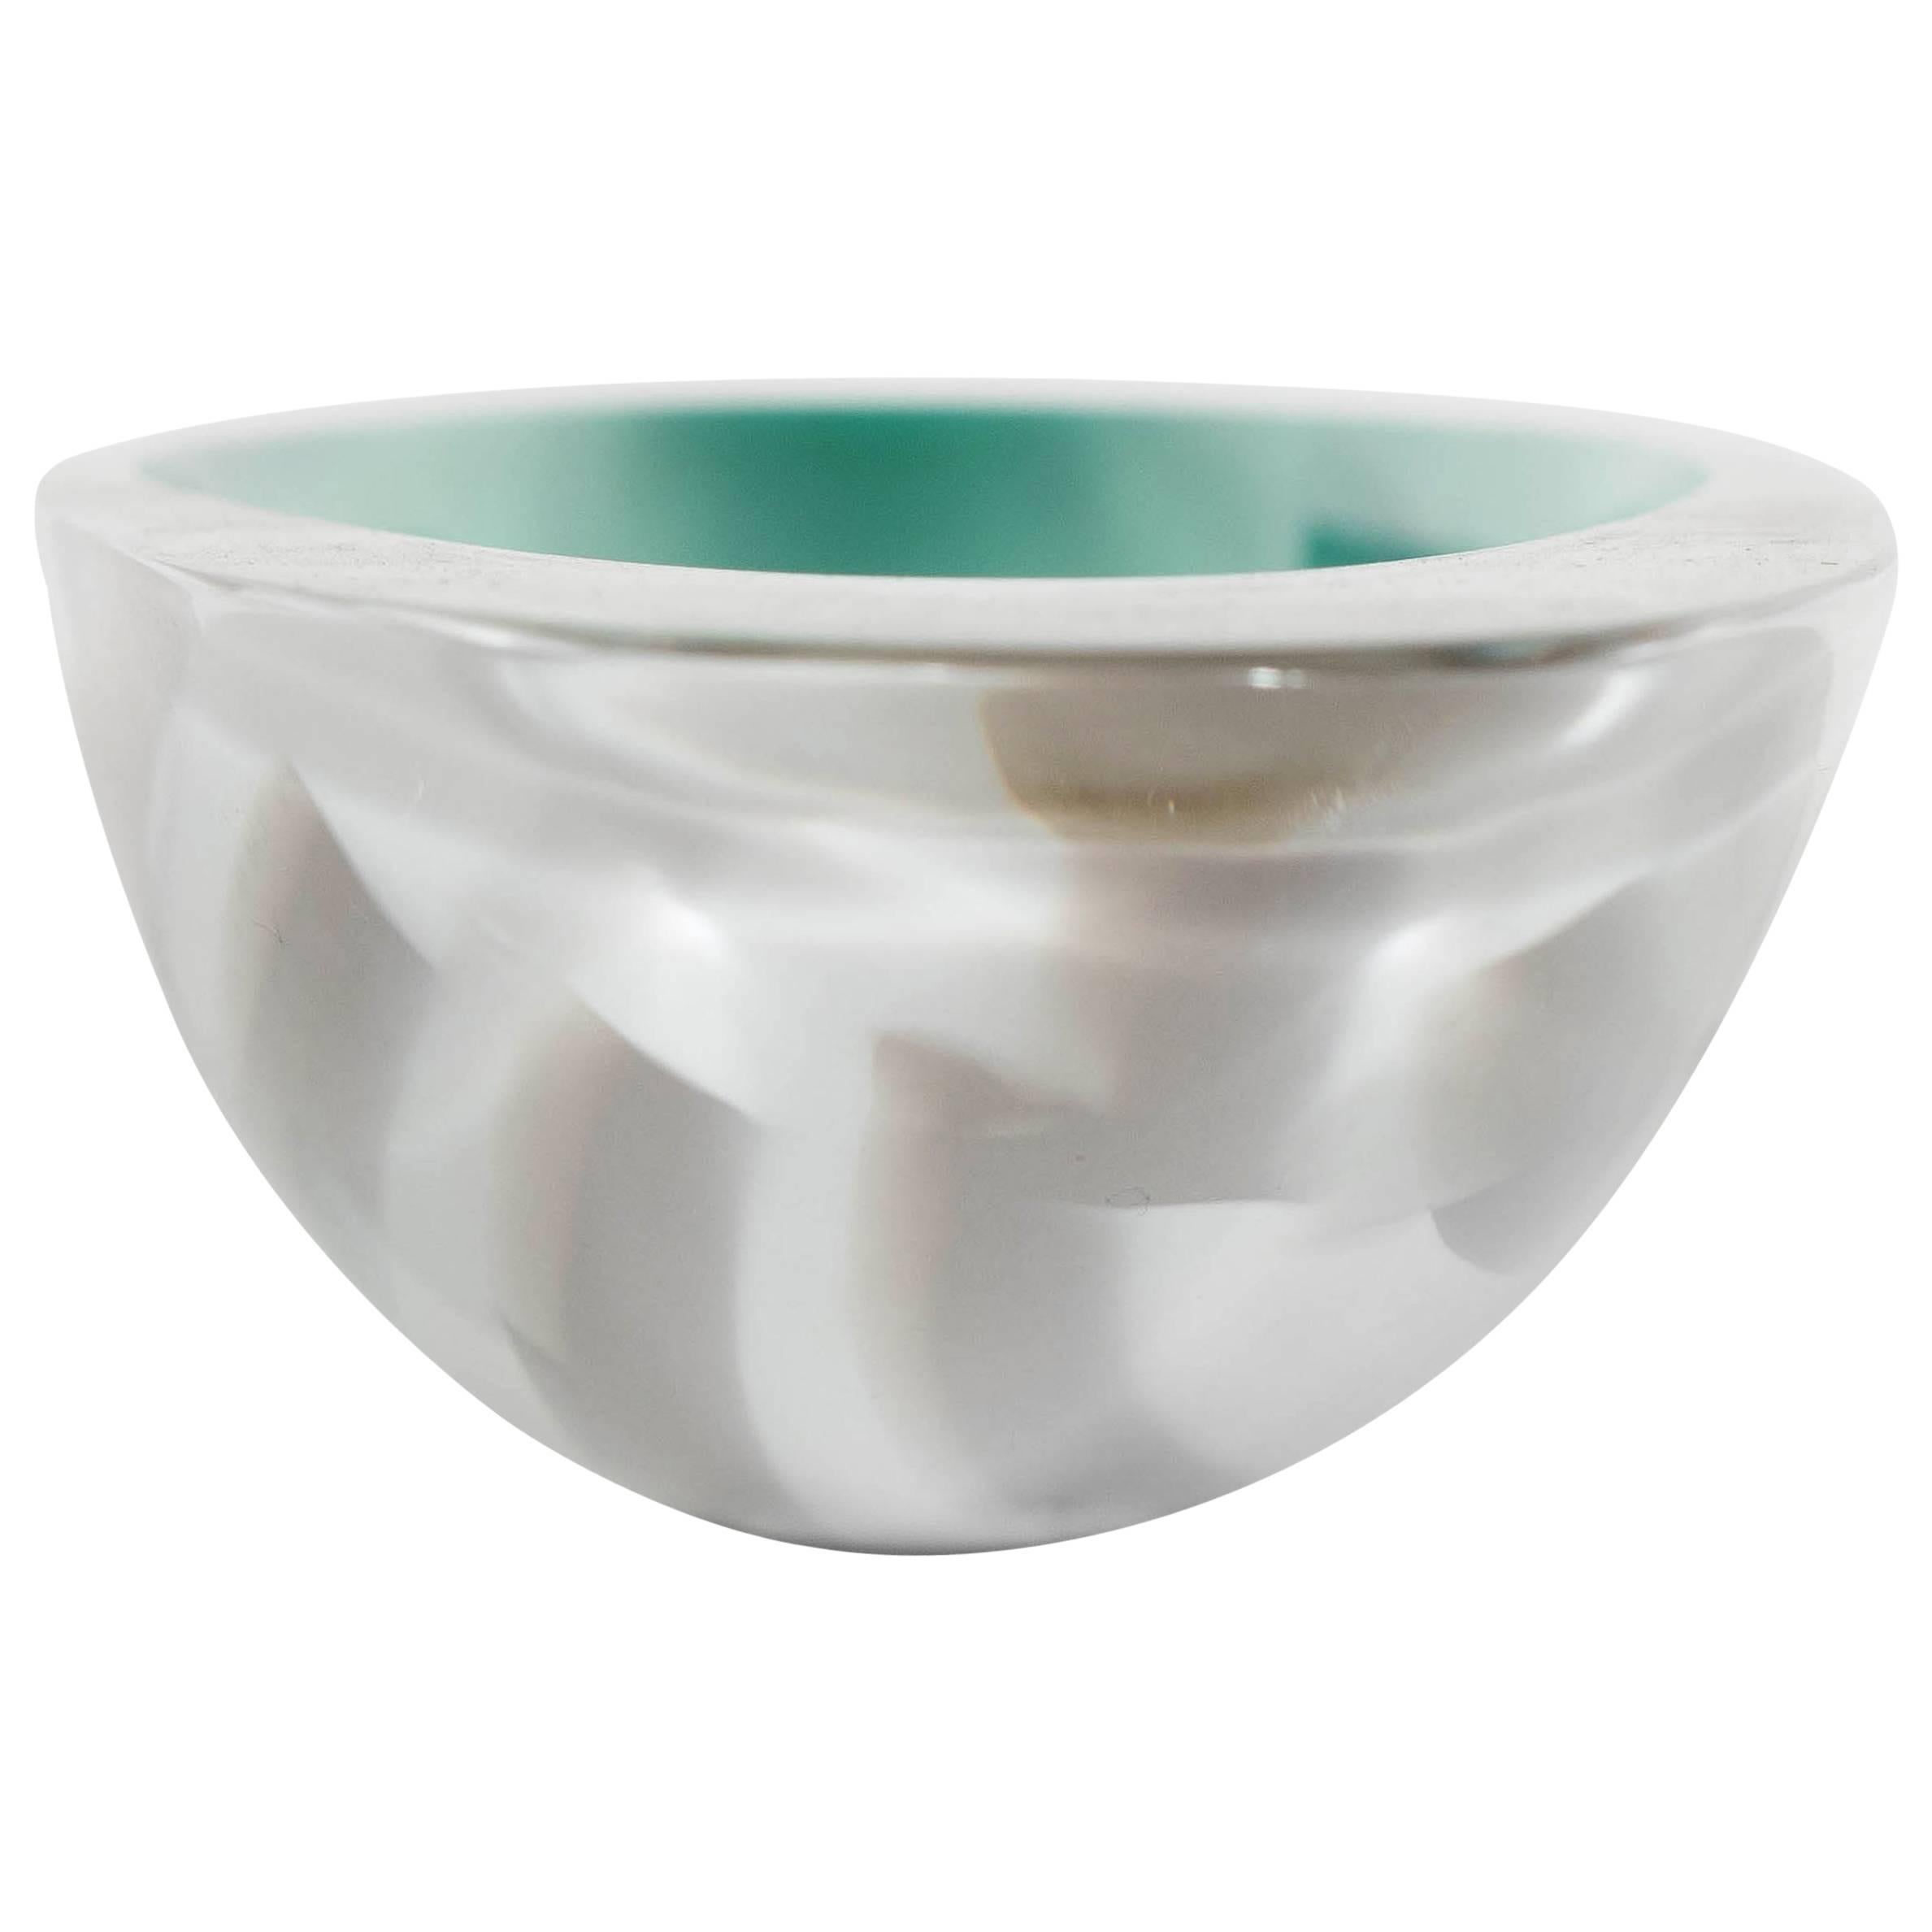 This exceptional Mid-Century Modernist Murano glass bowl features a shallow elongated ovoid shape with long bands of inter-woven colored bands in tones of jade, ivory and pewter, it is a Limited Edition (marked 18/101) and is signed Seguso and is